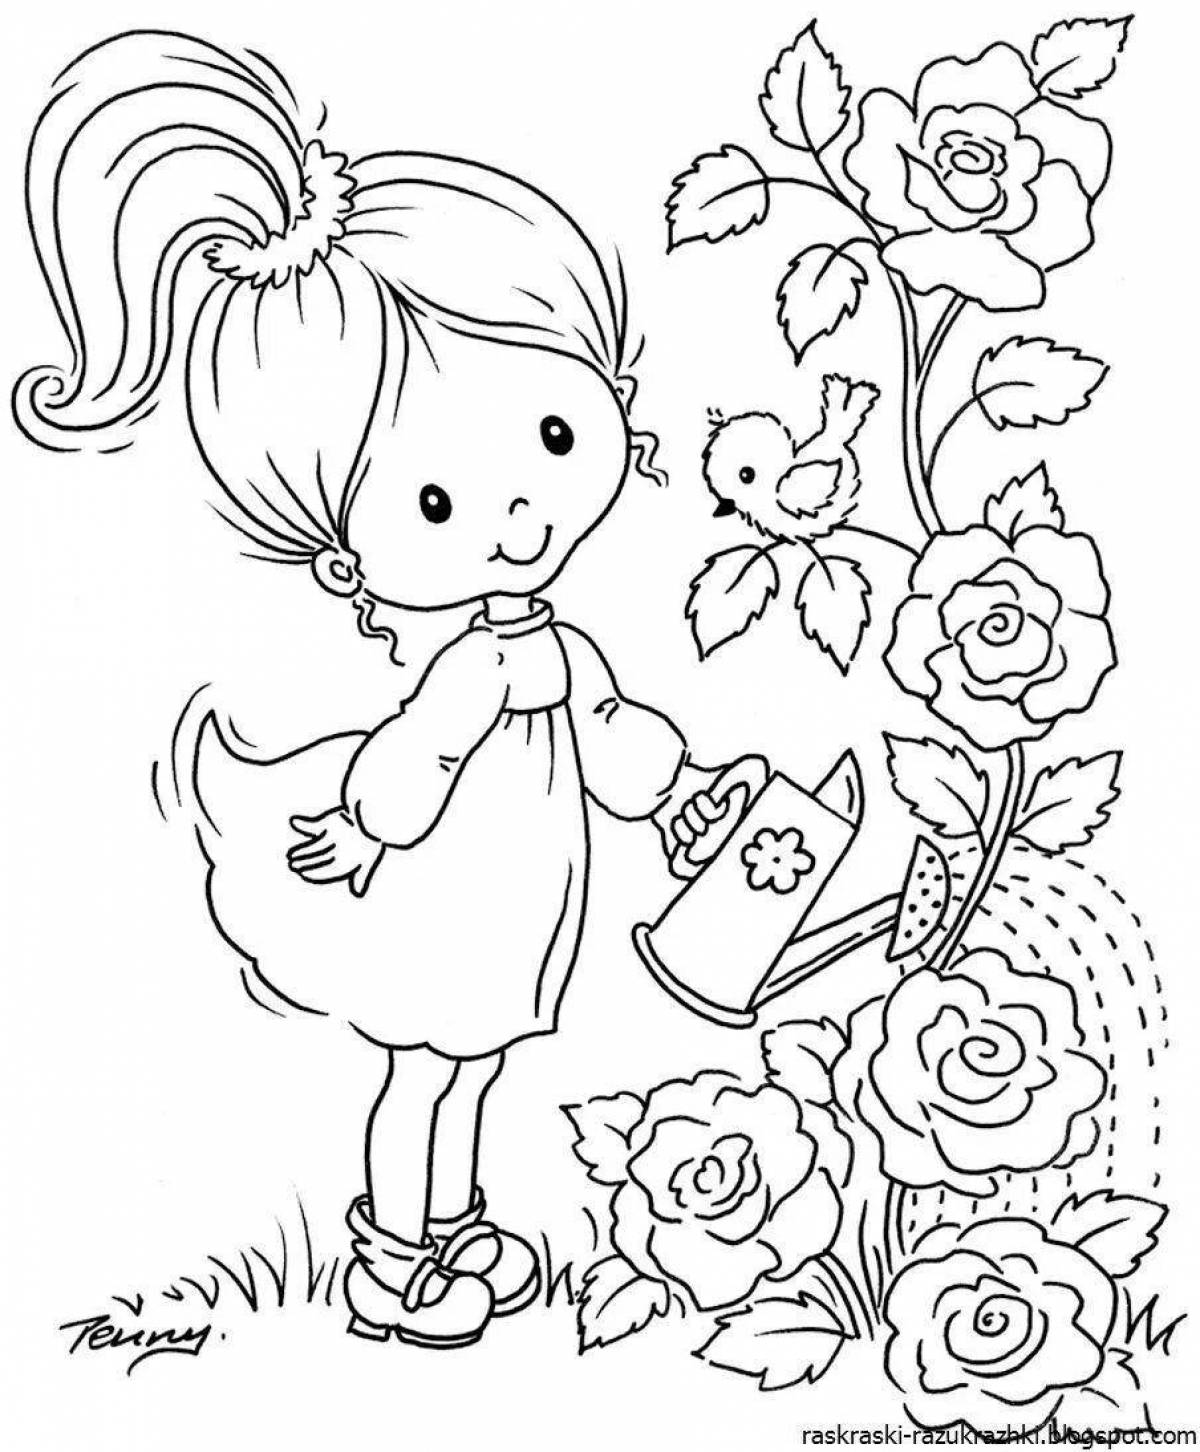 Fairytale coloring for girls 7 years old grade 1